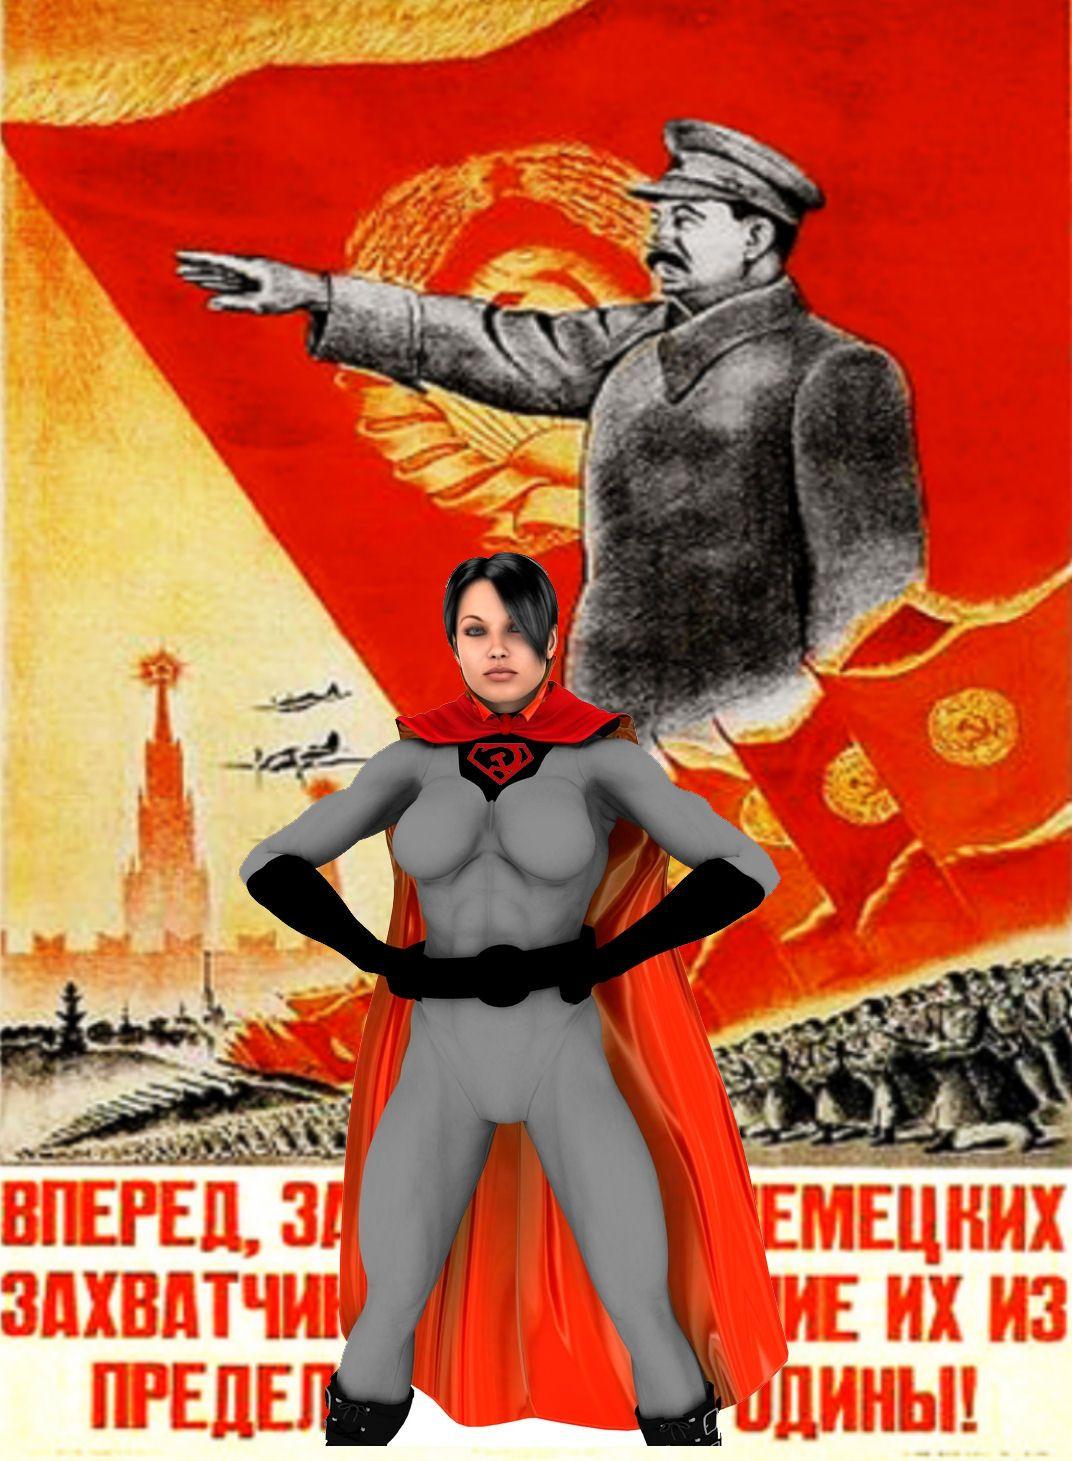 Long Live The Red Army By Soviet Superwoman